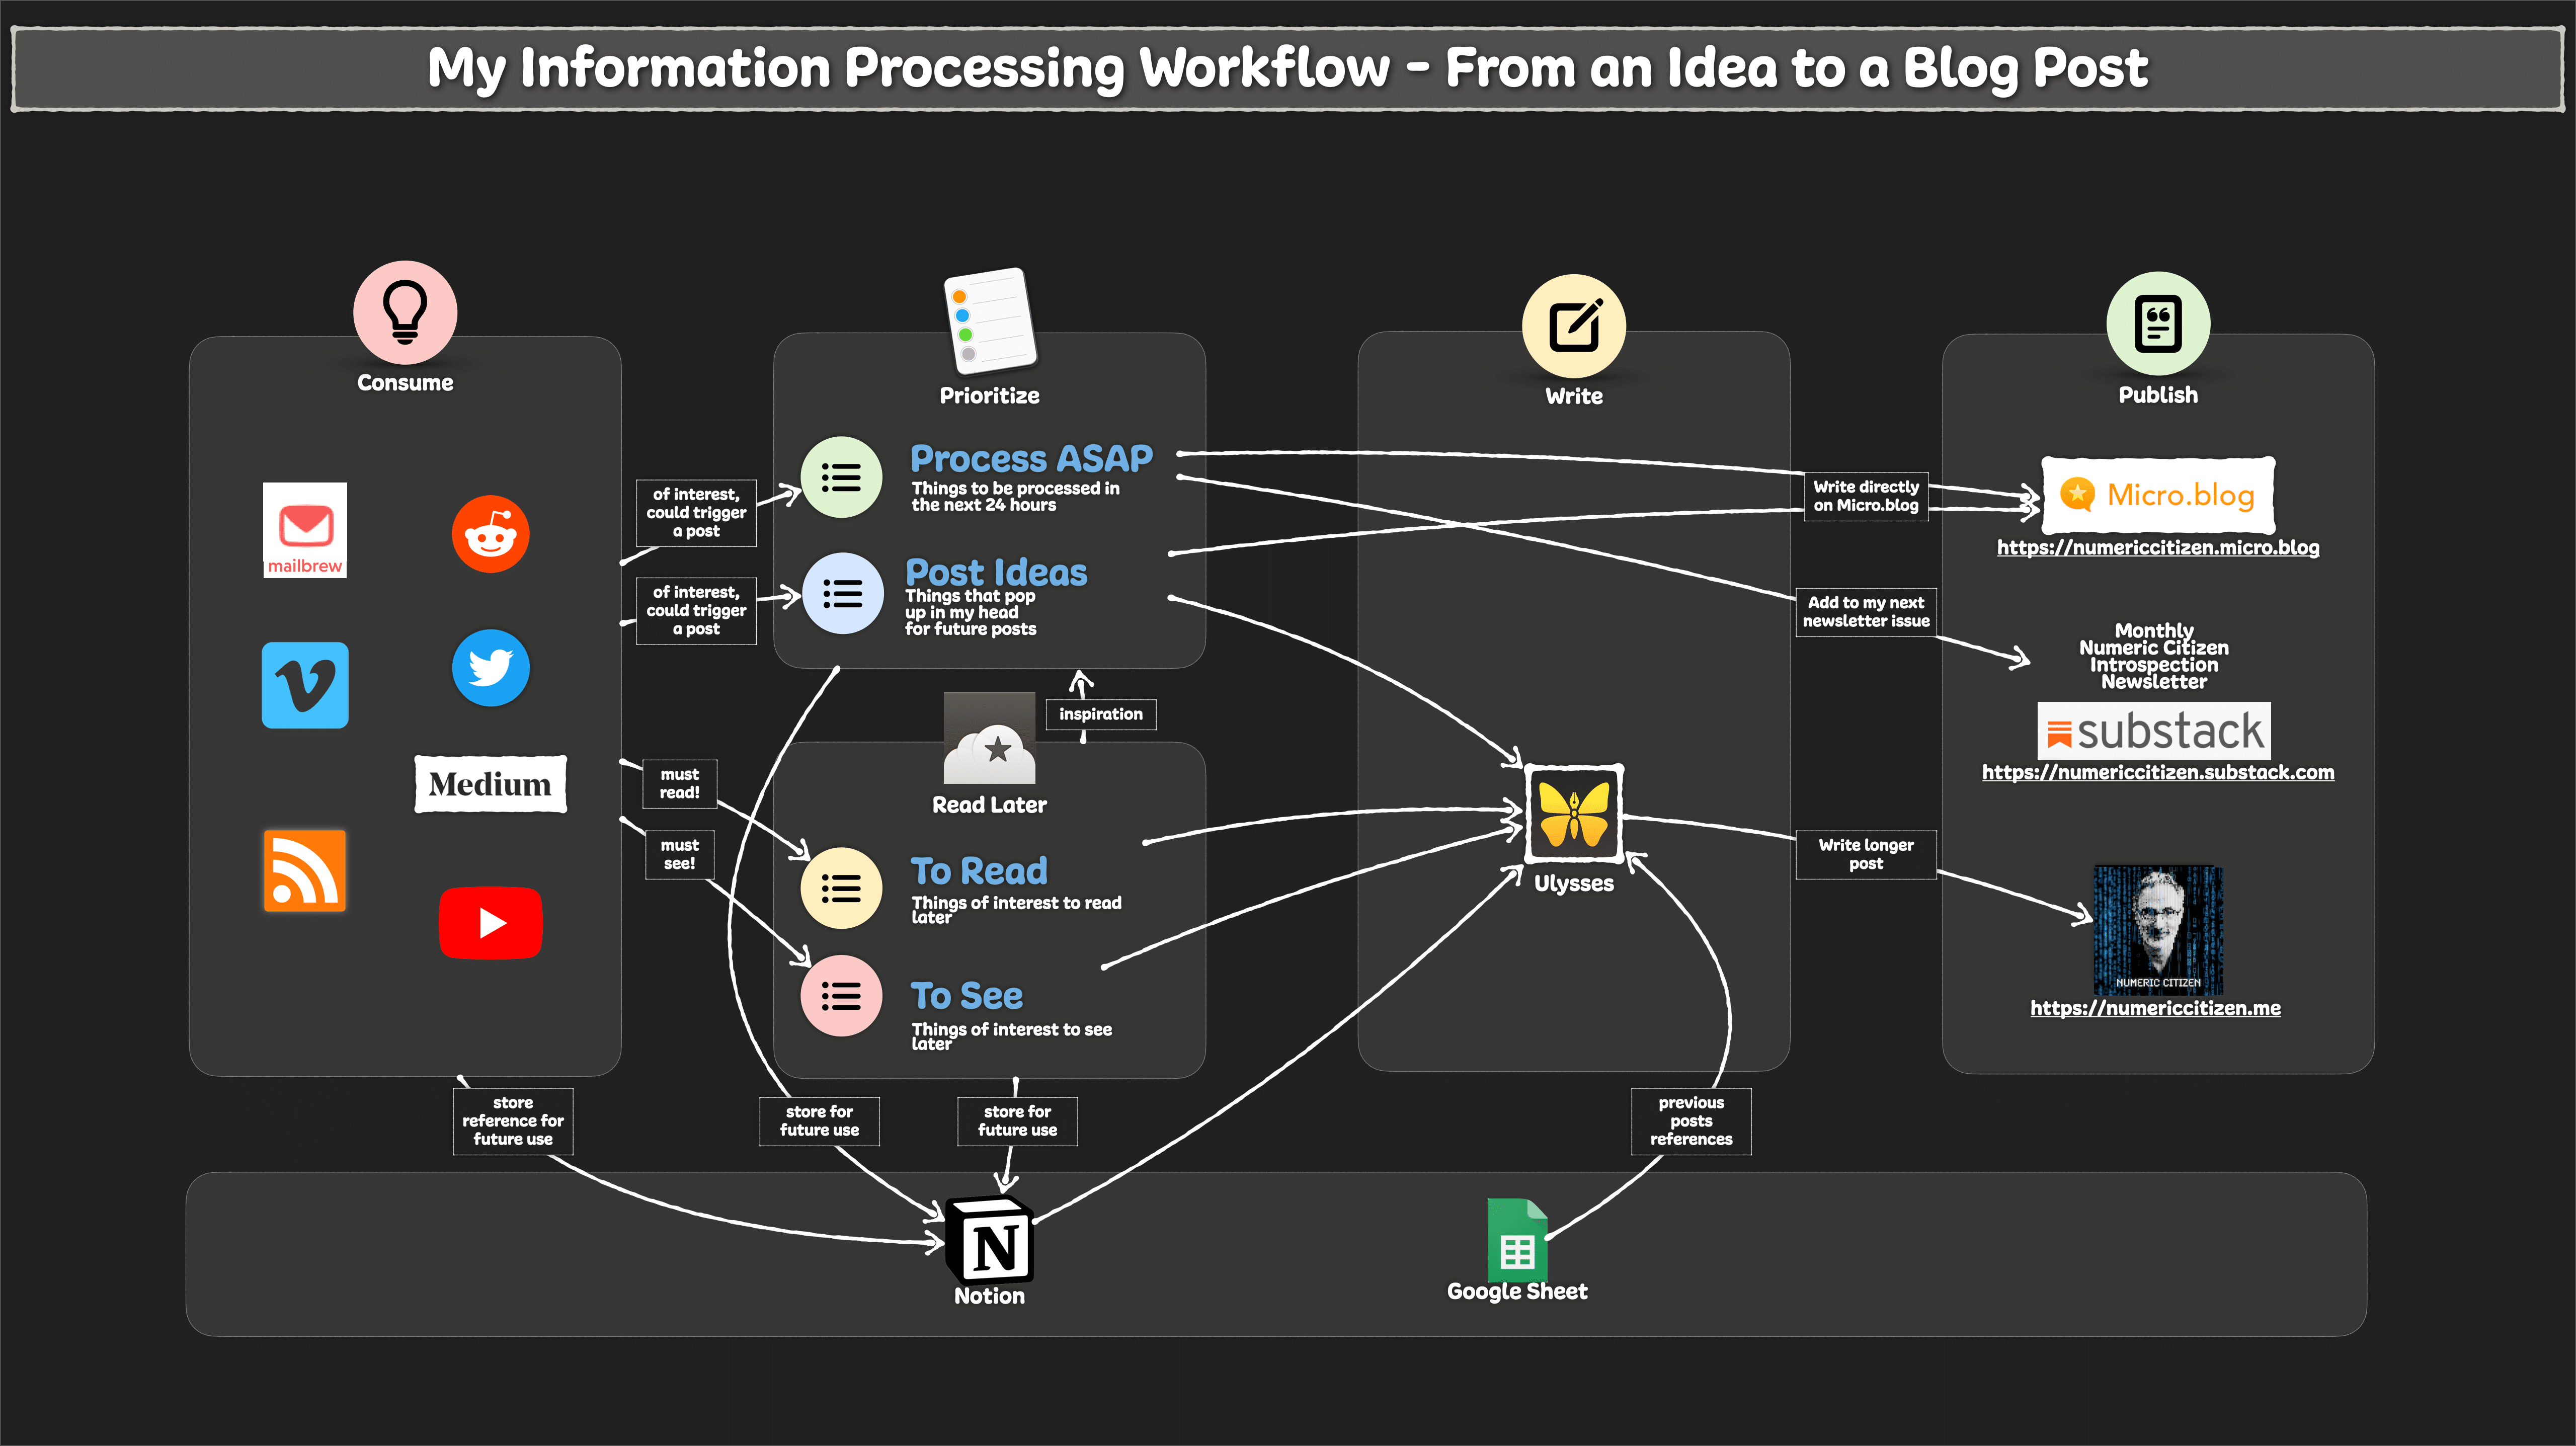 My information processing workflow (click to enlarge)